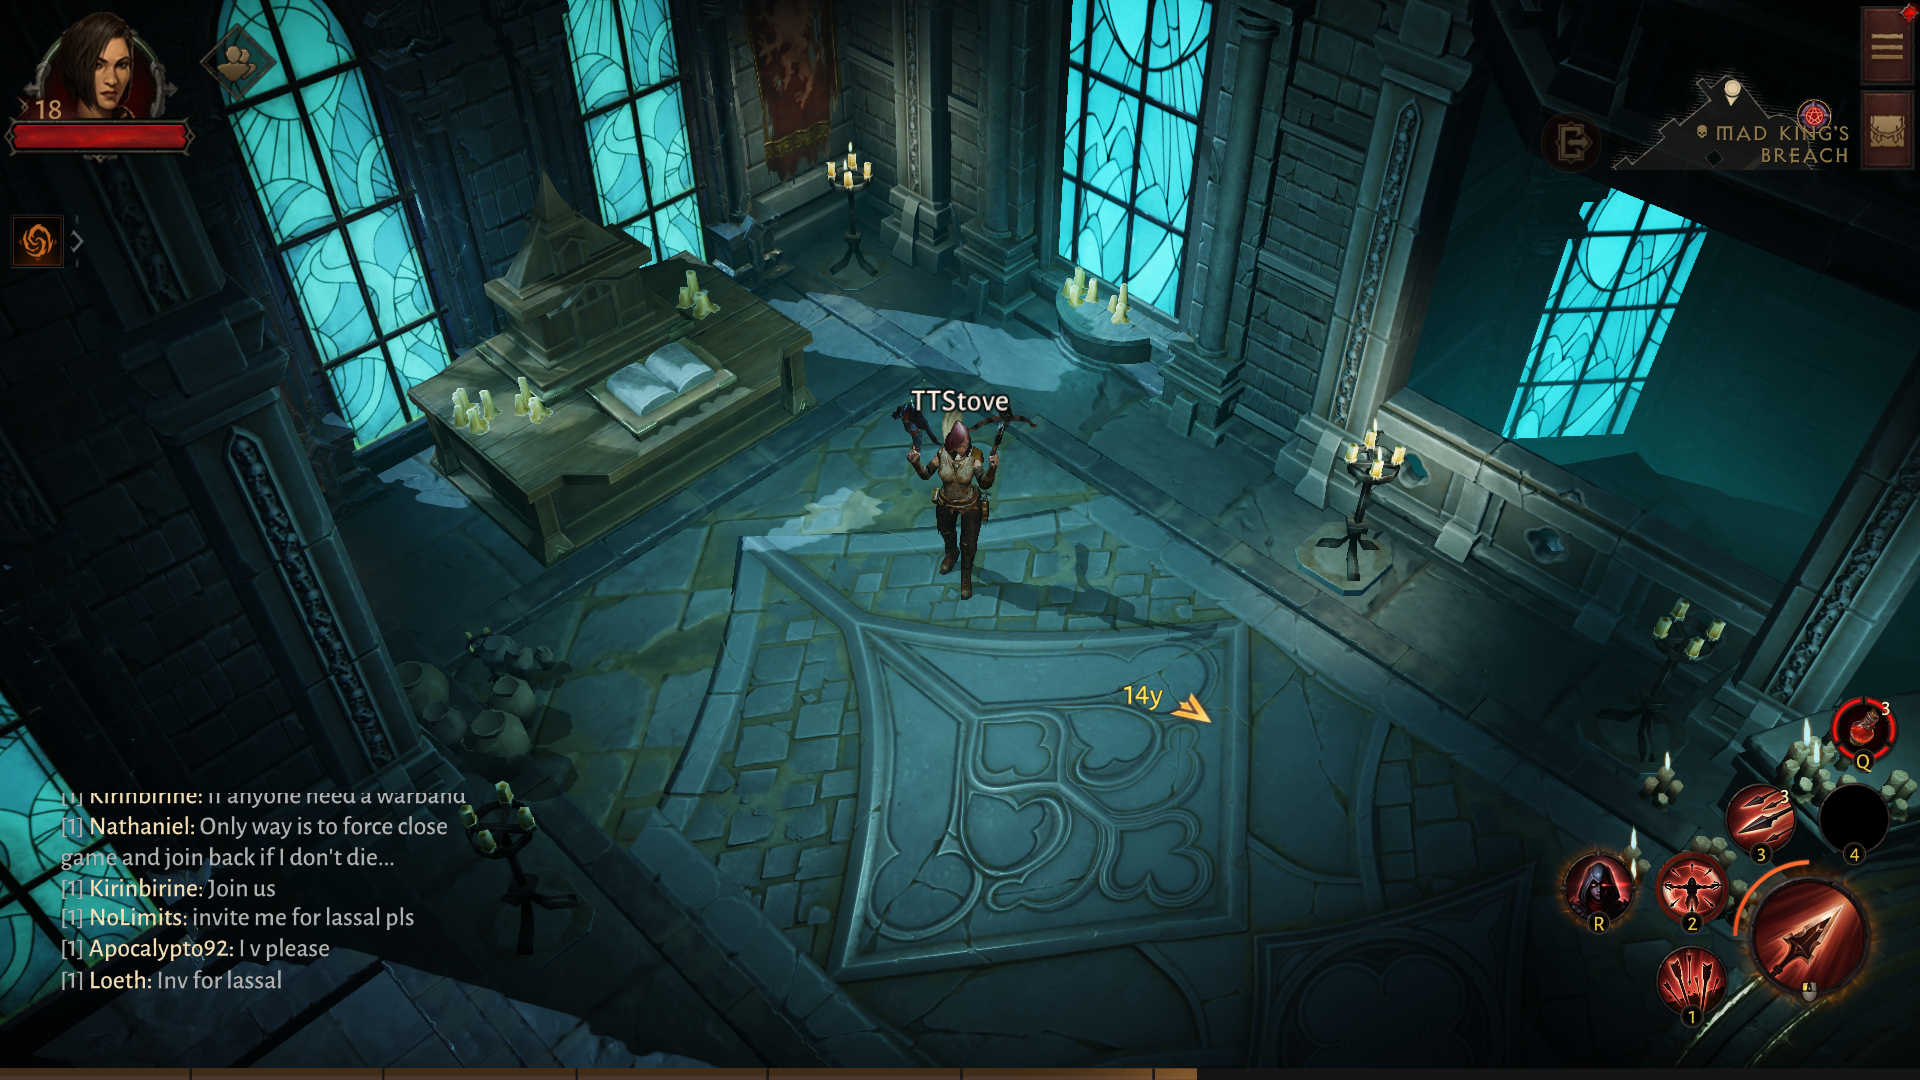 An archer stands within a castle study in Diablo Immortal, showing Low graphics.